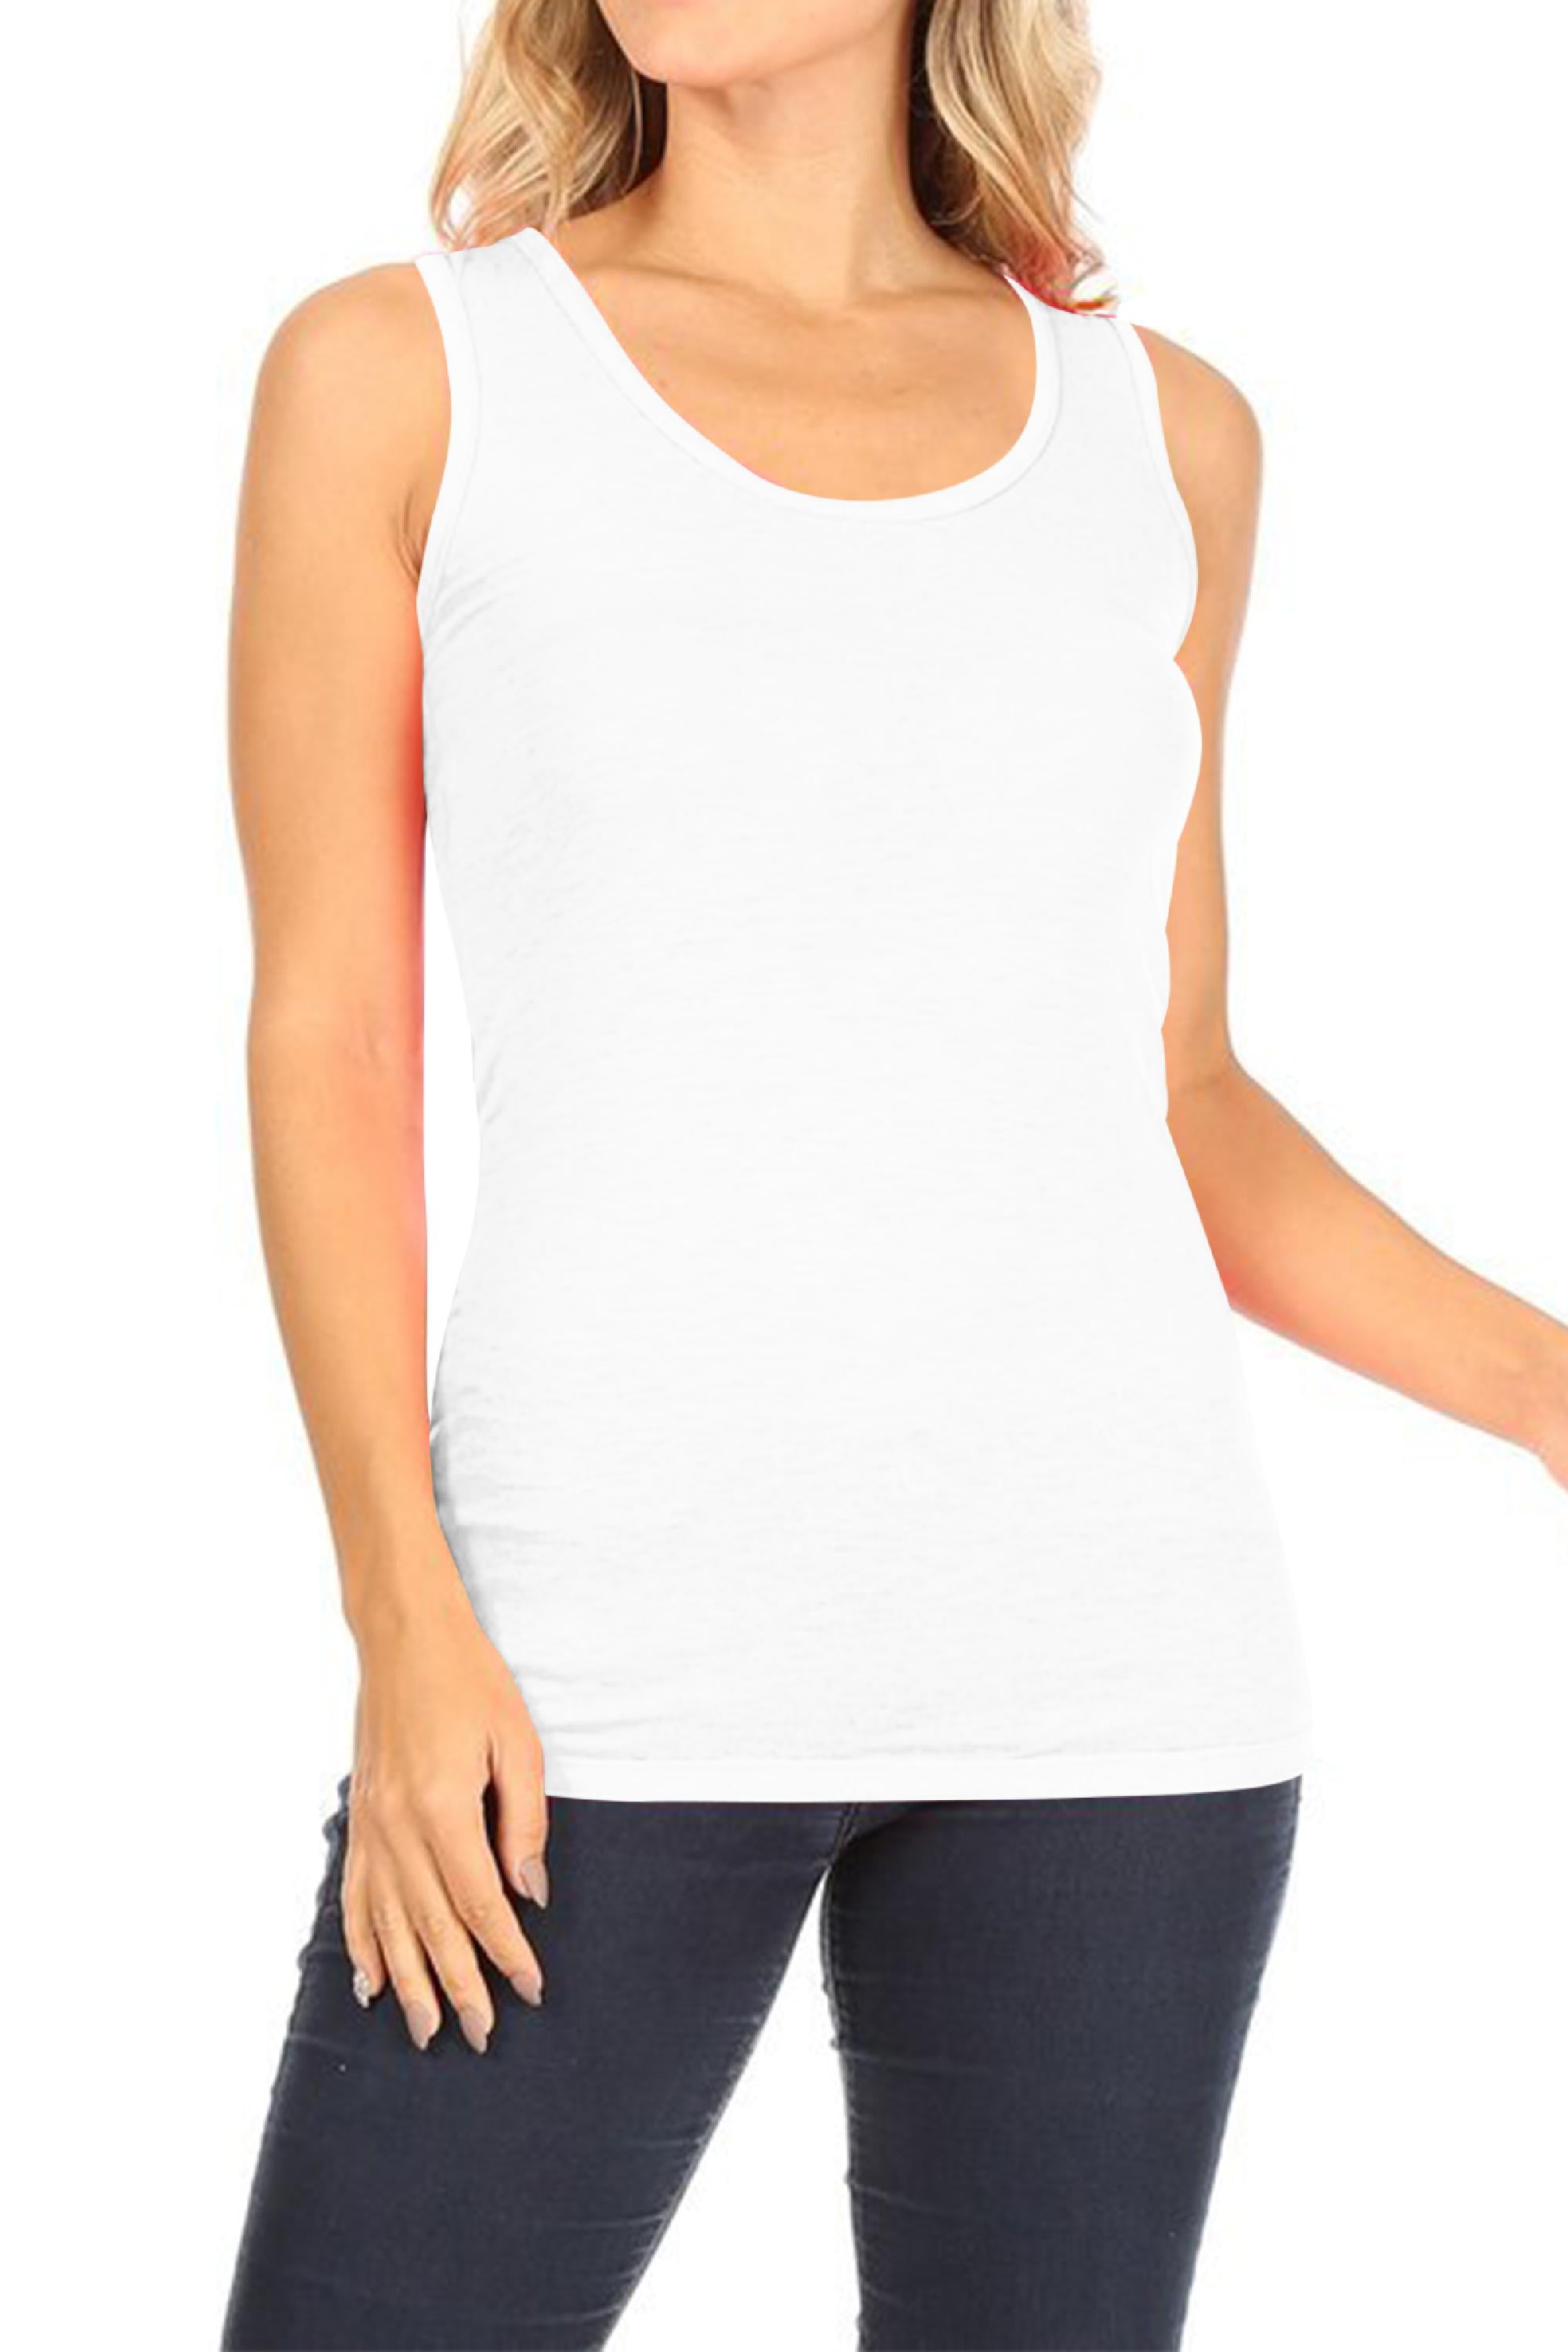 Women's Lightweight Casual Sleeveless Scoop Neck Solid Basic Camisole Tank Top